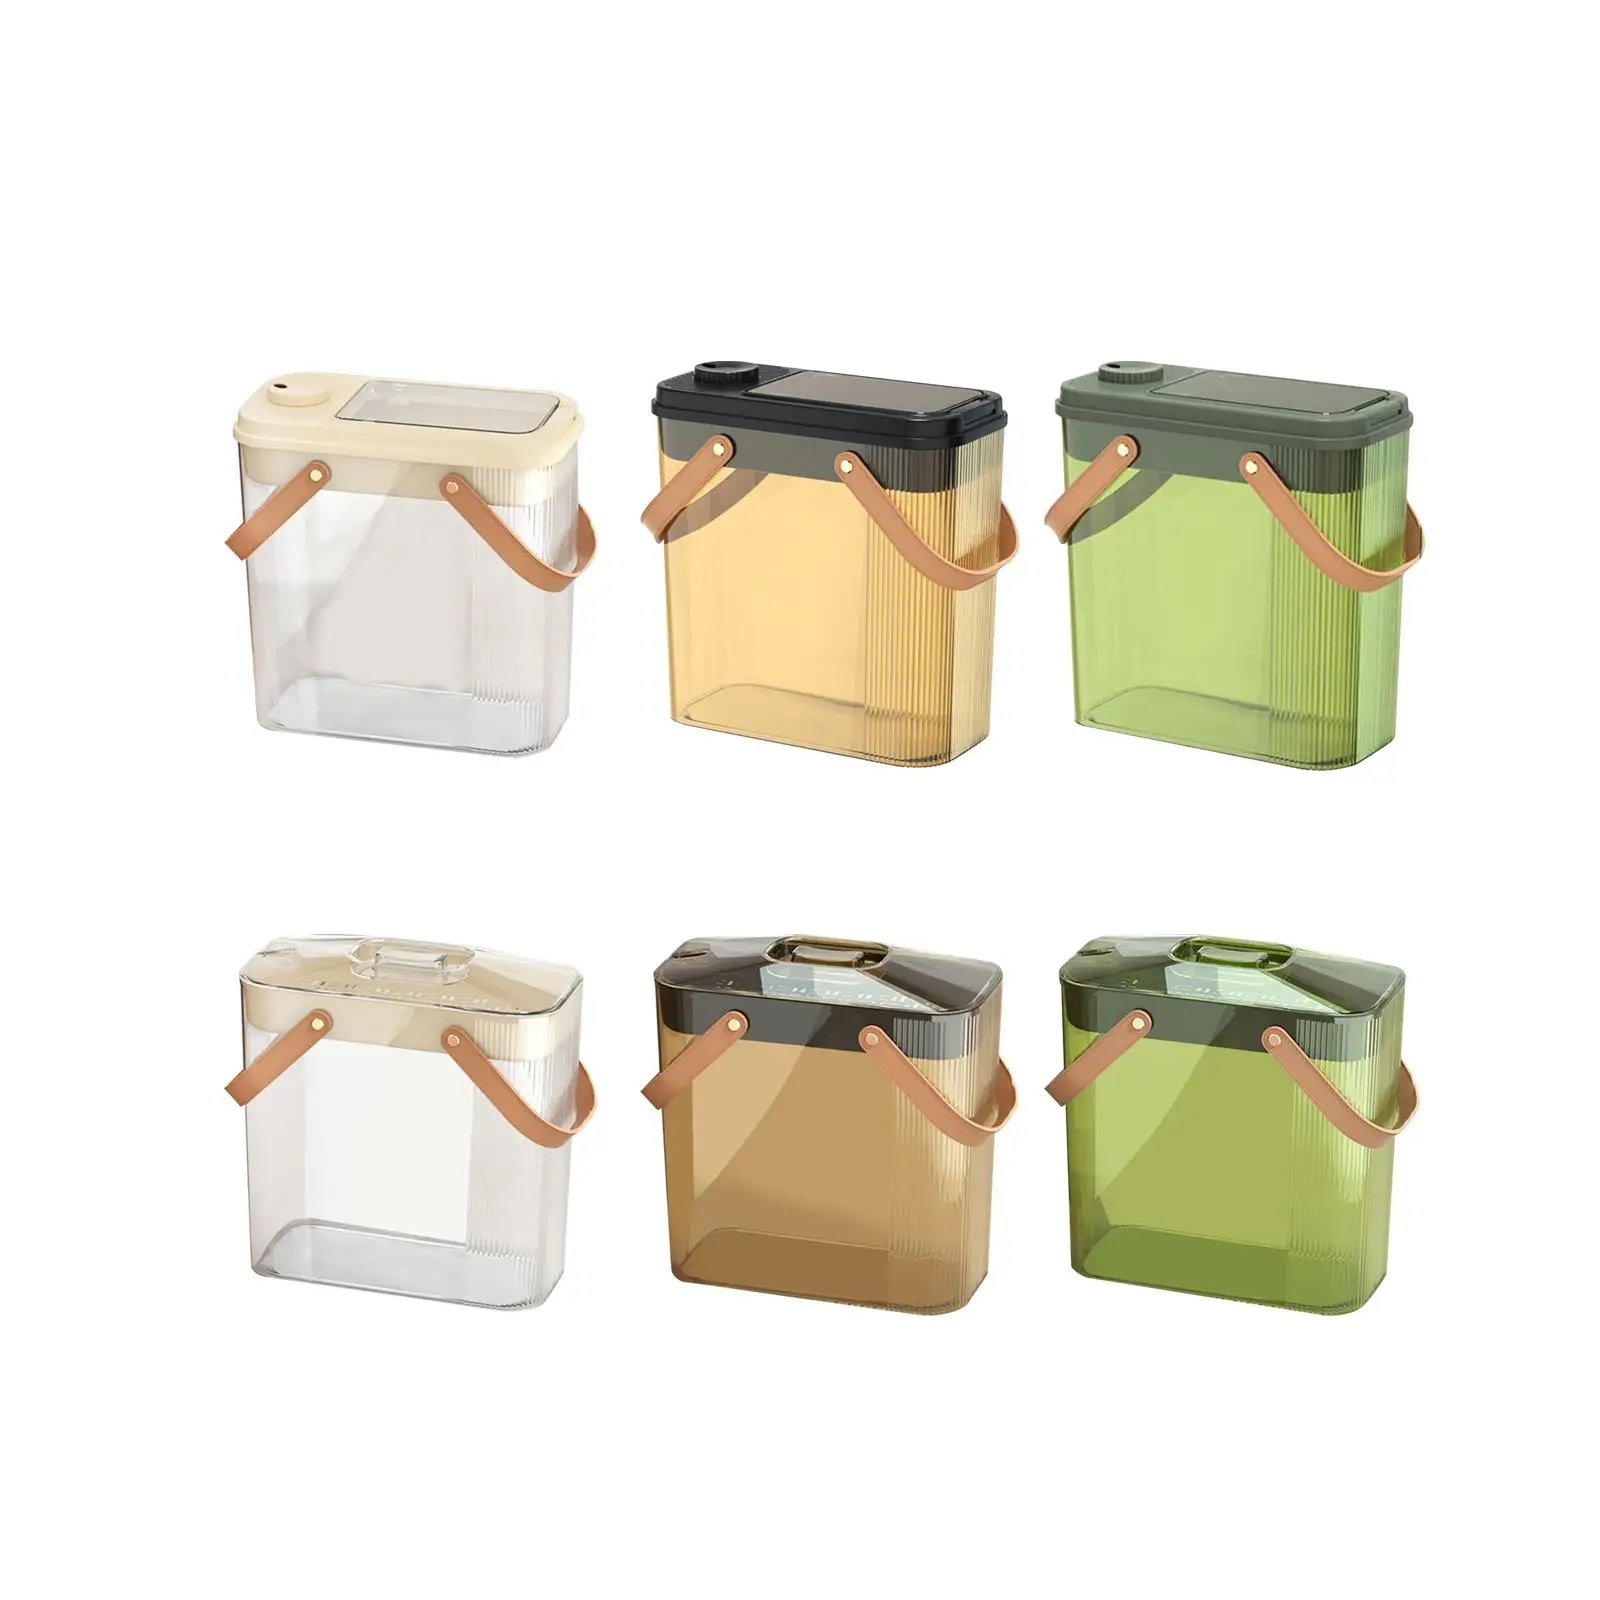 Tea Residue Separation Filtration Bucket Easy to Use Detachable Waste Water Bucket for Office Home Living Room Bathroom Kitchen